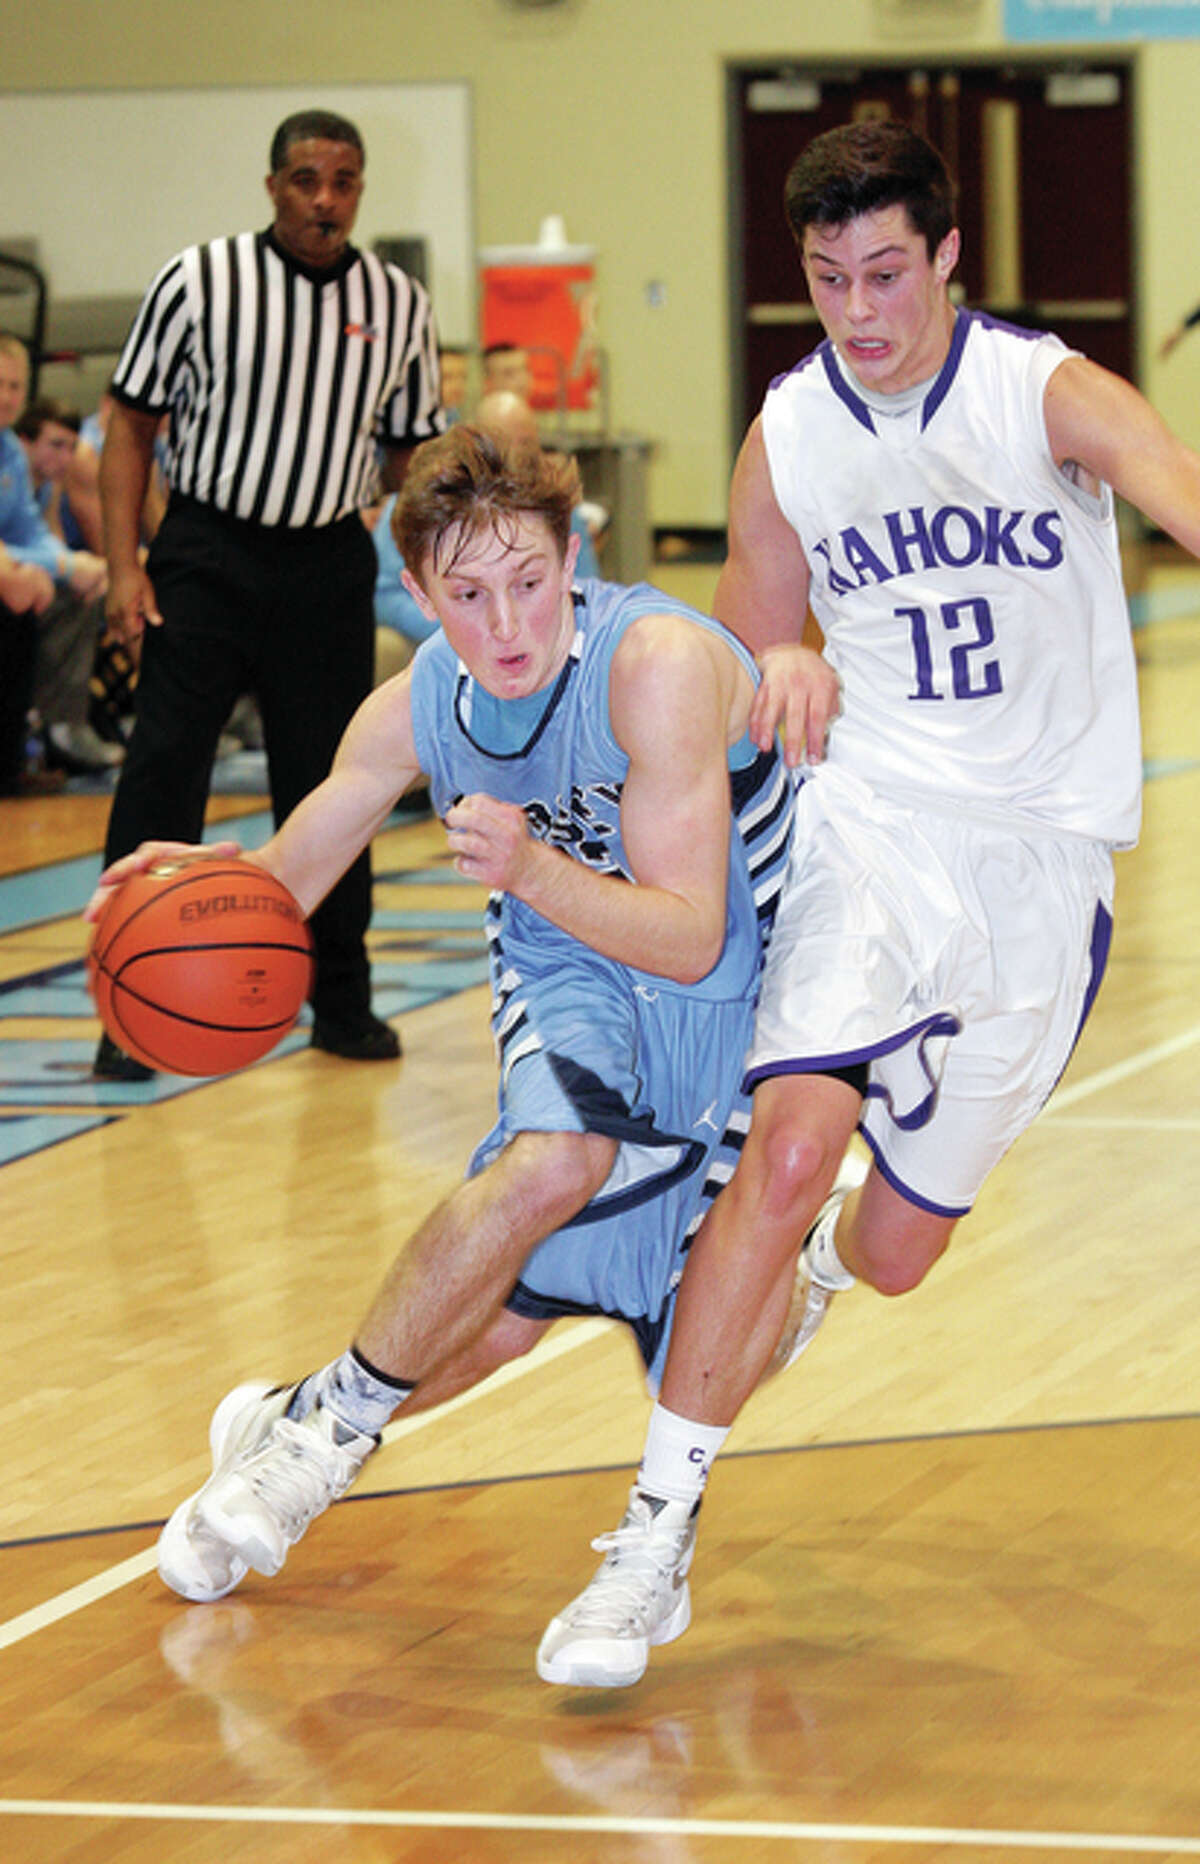 Jersey’s Zac Ridenhour (left) drives to the basket past Collinsville’s Zach Flora on Monday night at Havens Gym in Jerseyville.